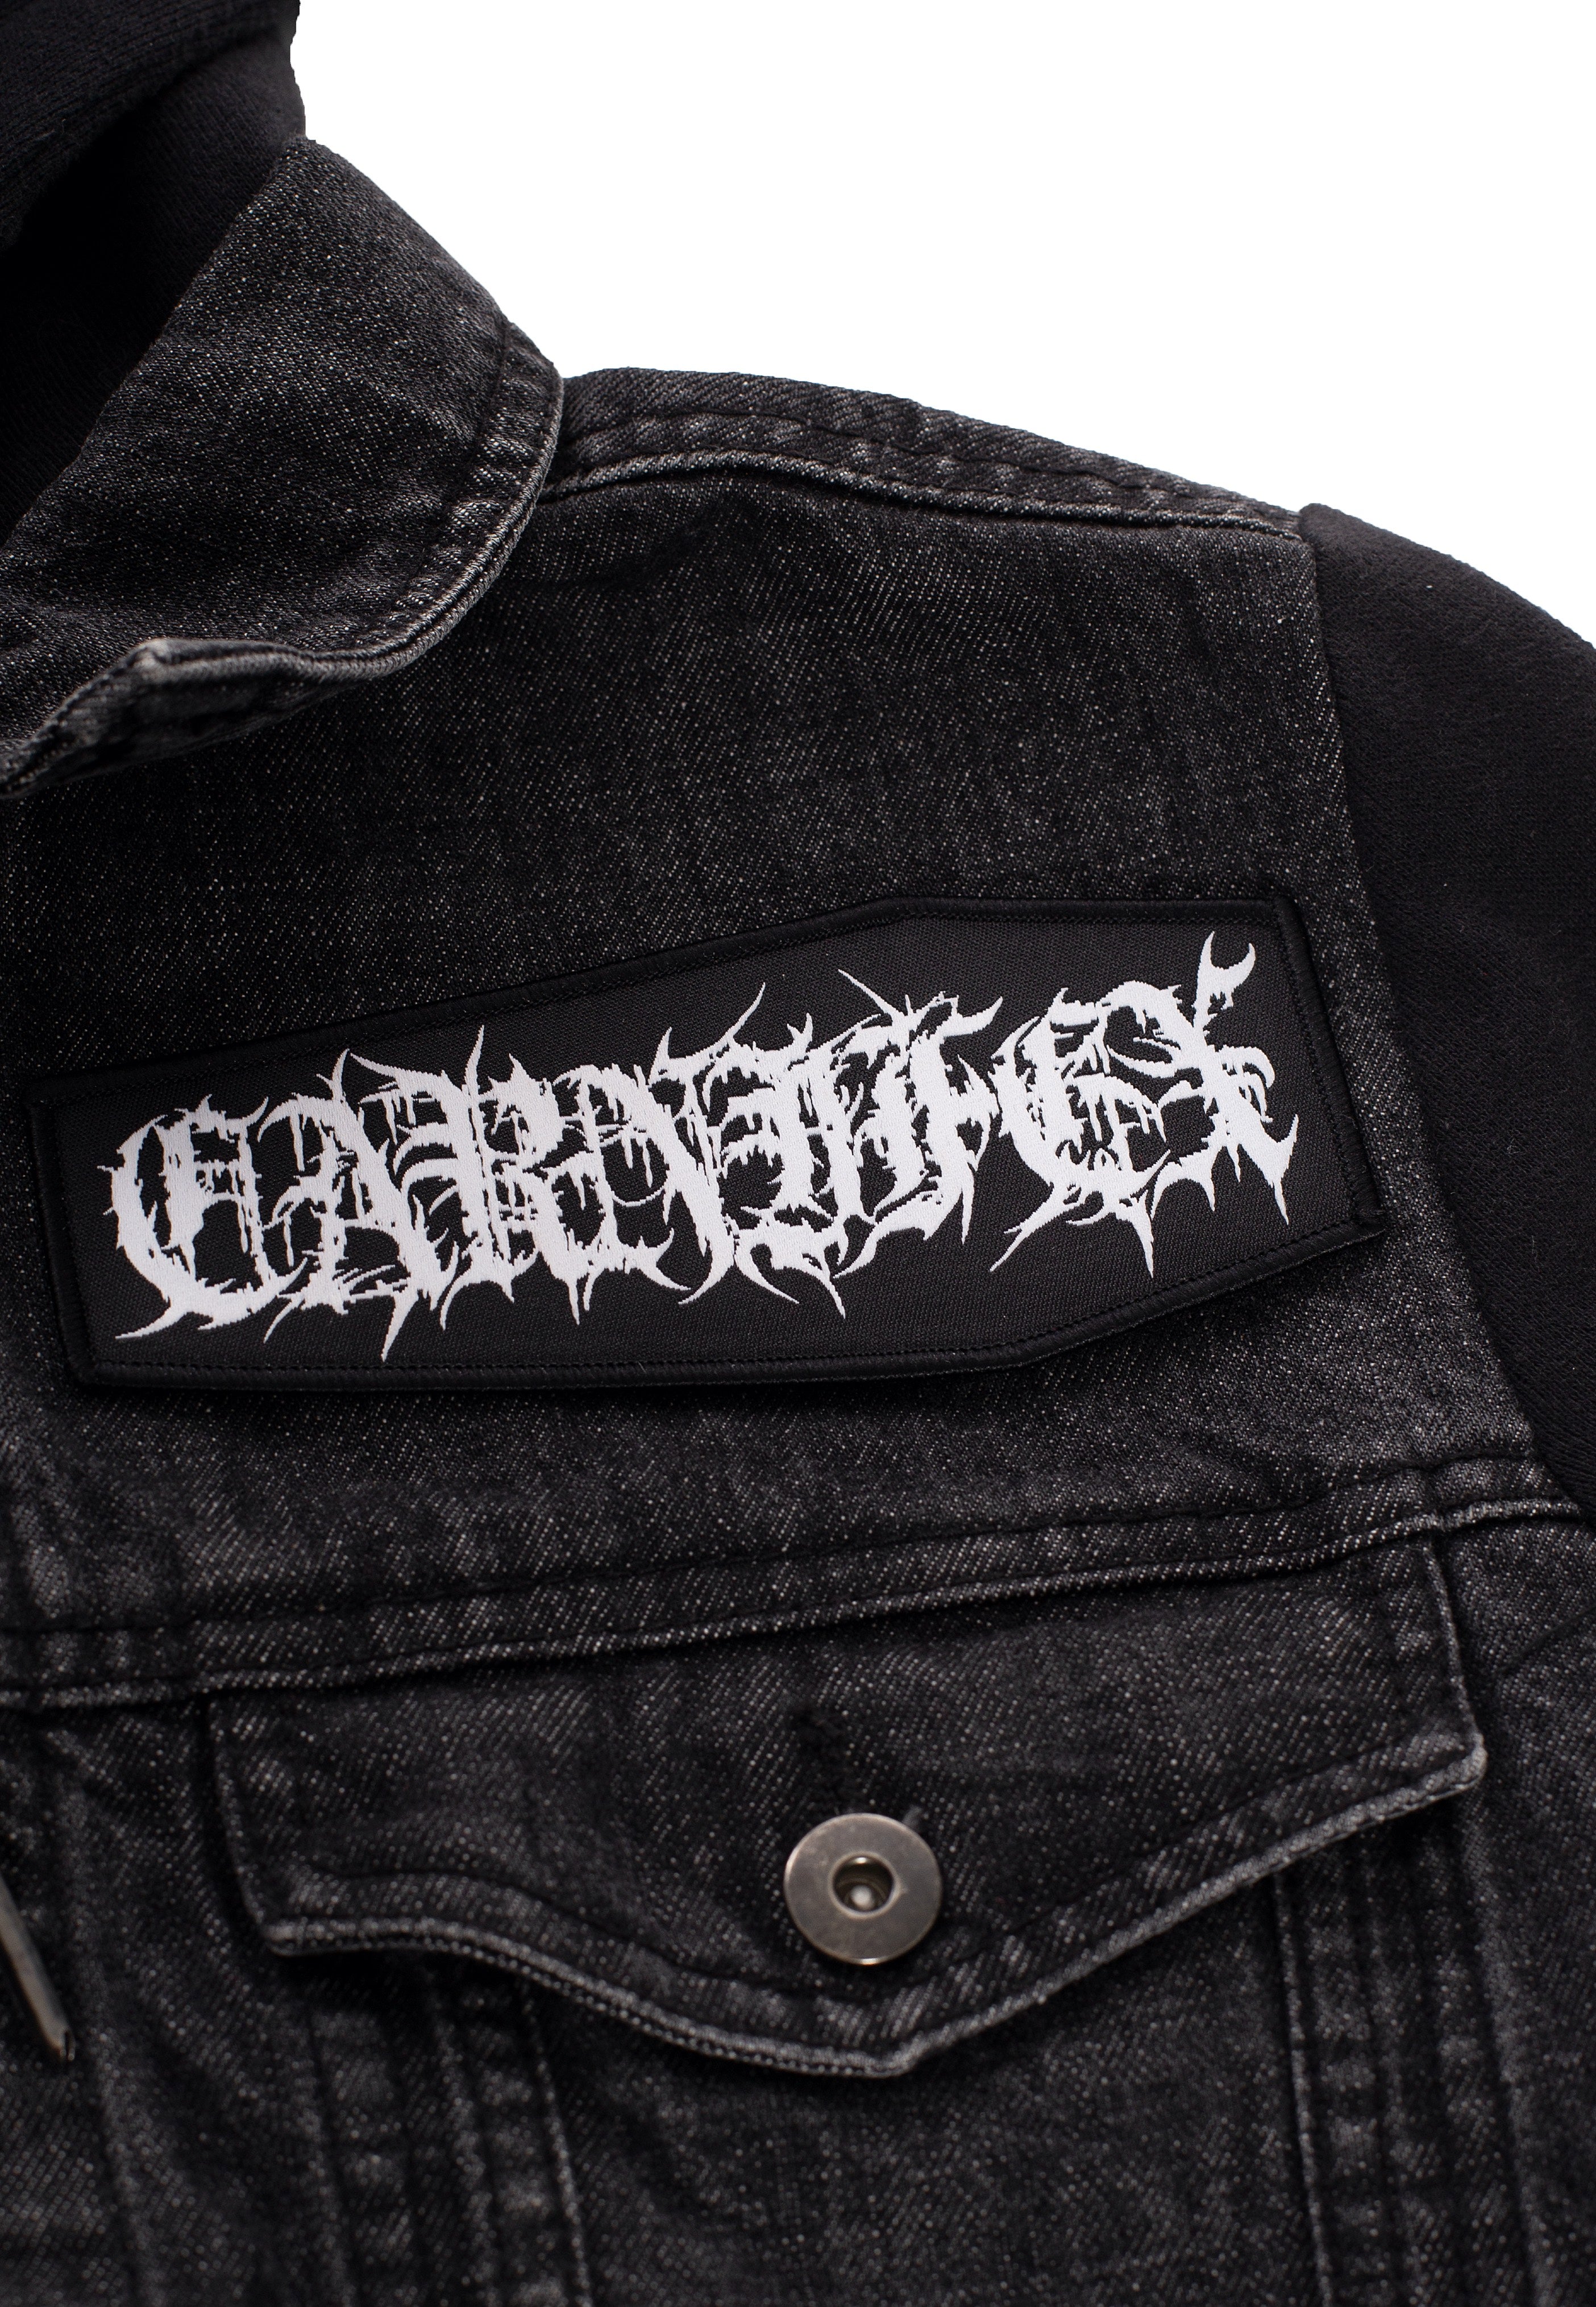 Carnifex - Coffin - Patch